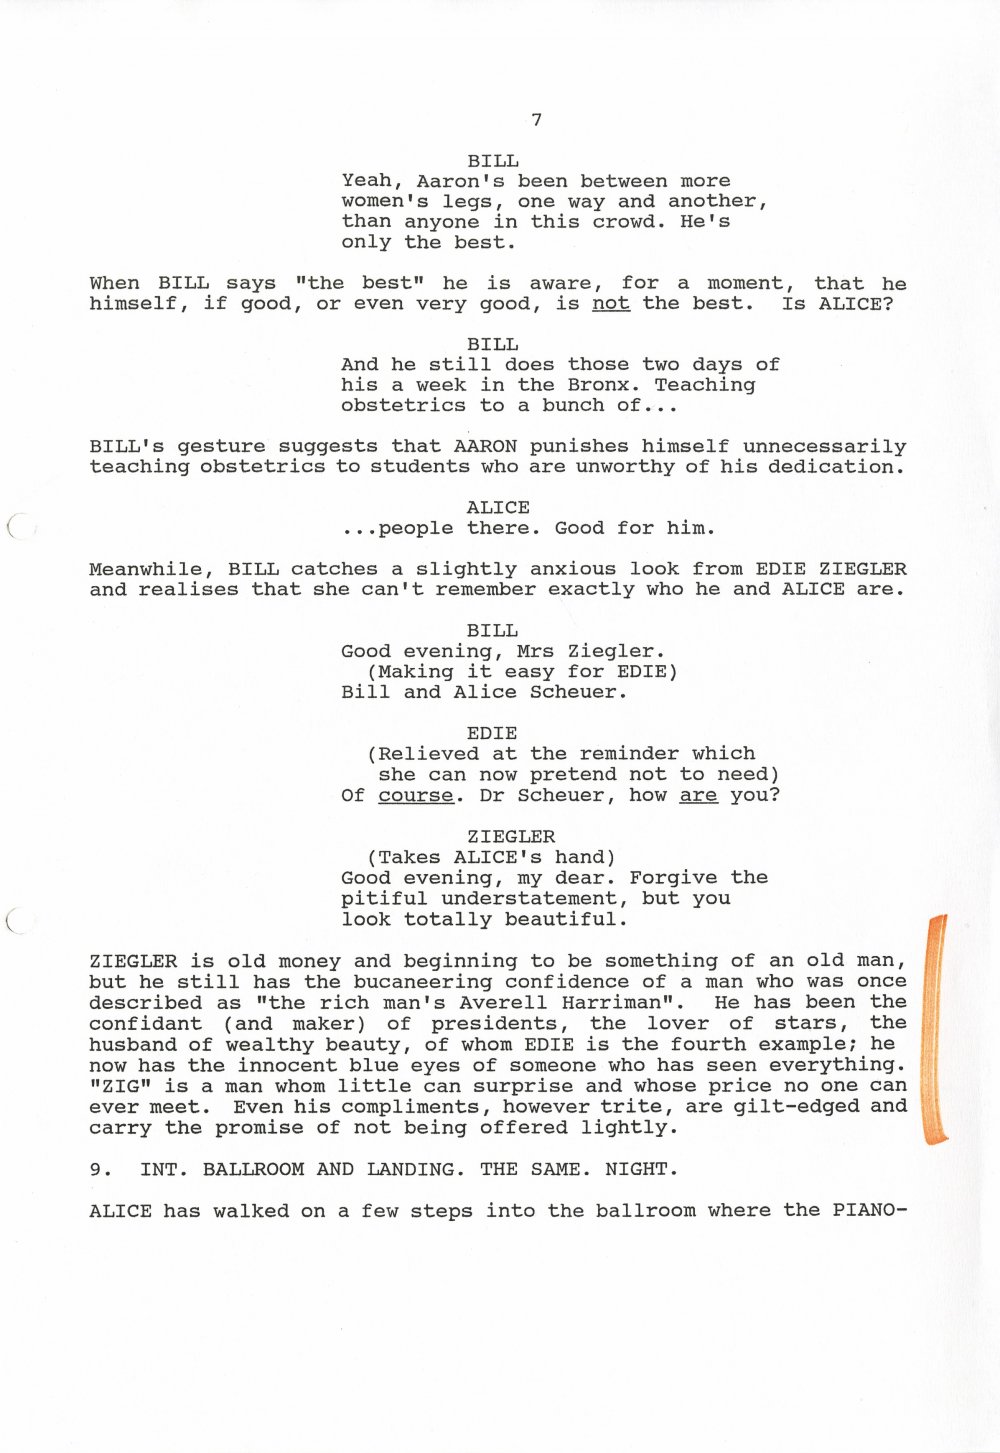 A previously unpublished image of Stanley Kubrick’s annotated copy of one of Frederic Raphael’s early scripts for Eyes Wide Shut, which introduces Ziegler, the film’s wealthy libertine